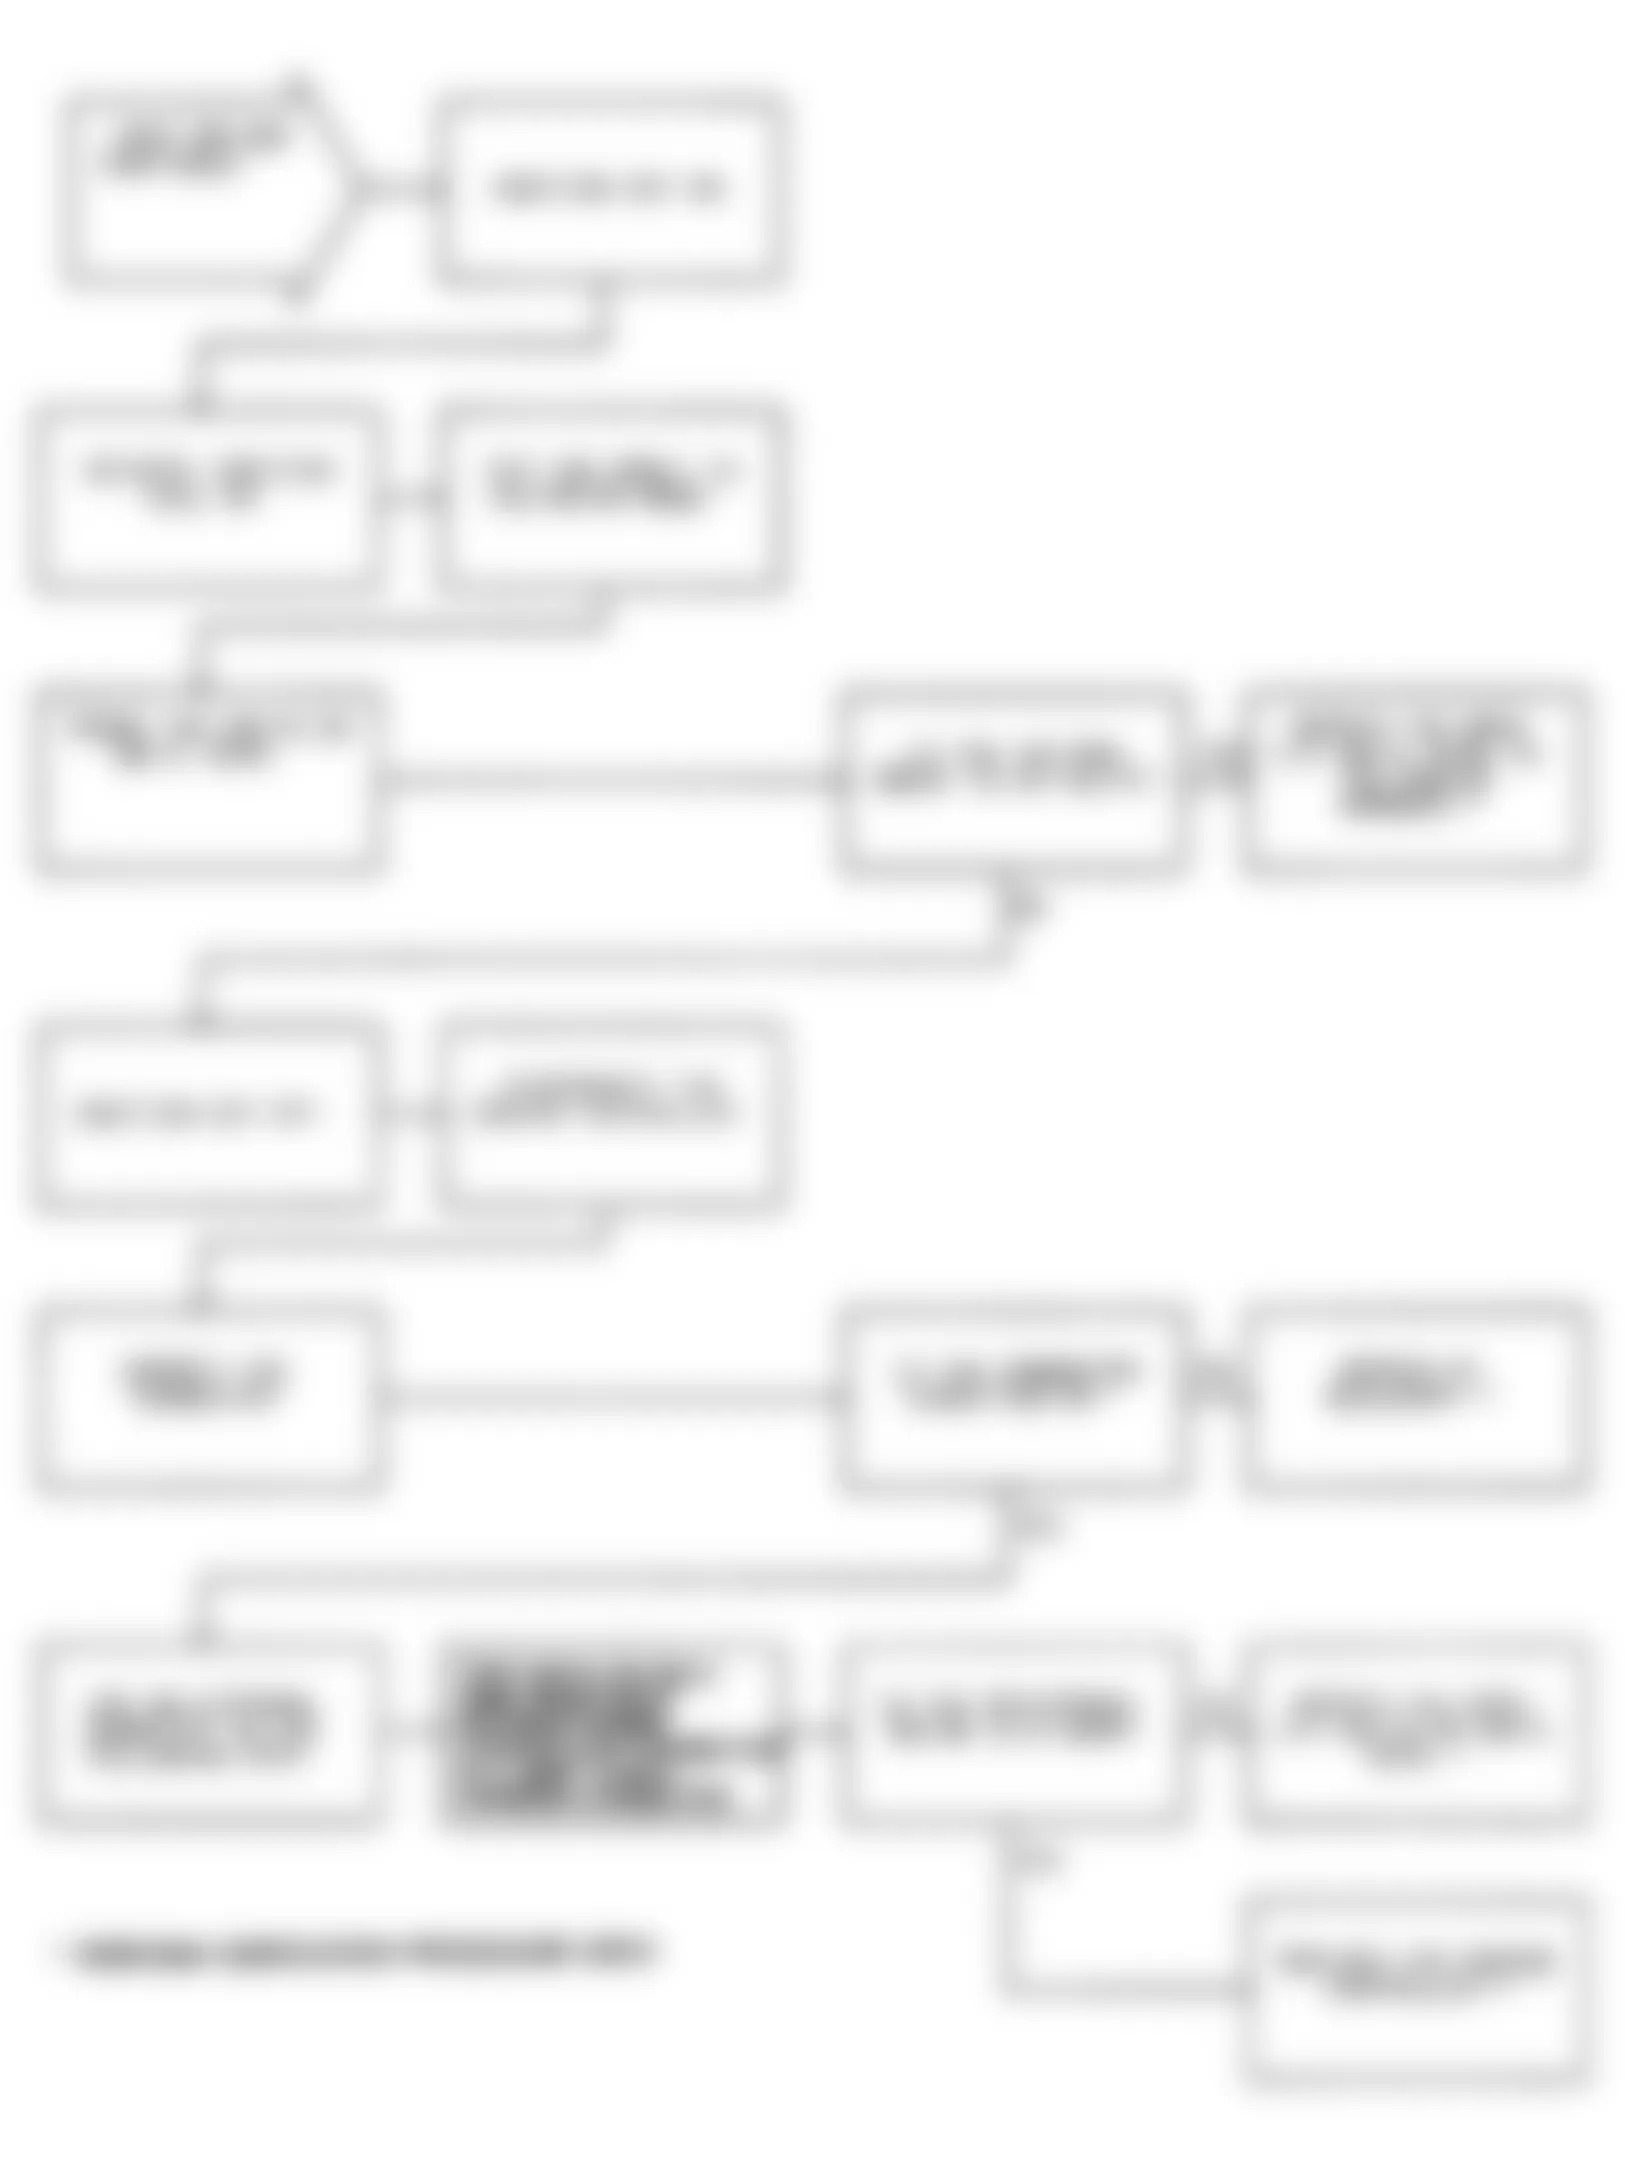 Chrysler Imperial 1991 - Component Locations -  Test DR-30A Code 43: Flowchart (2 of 2)